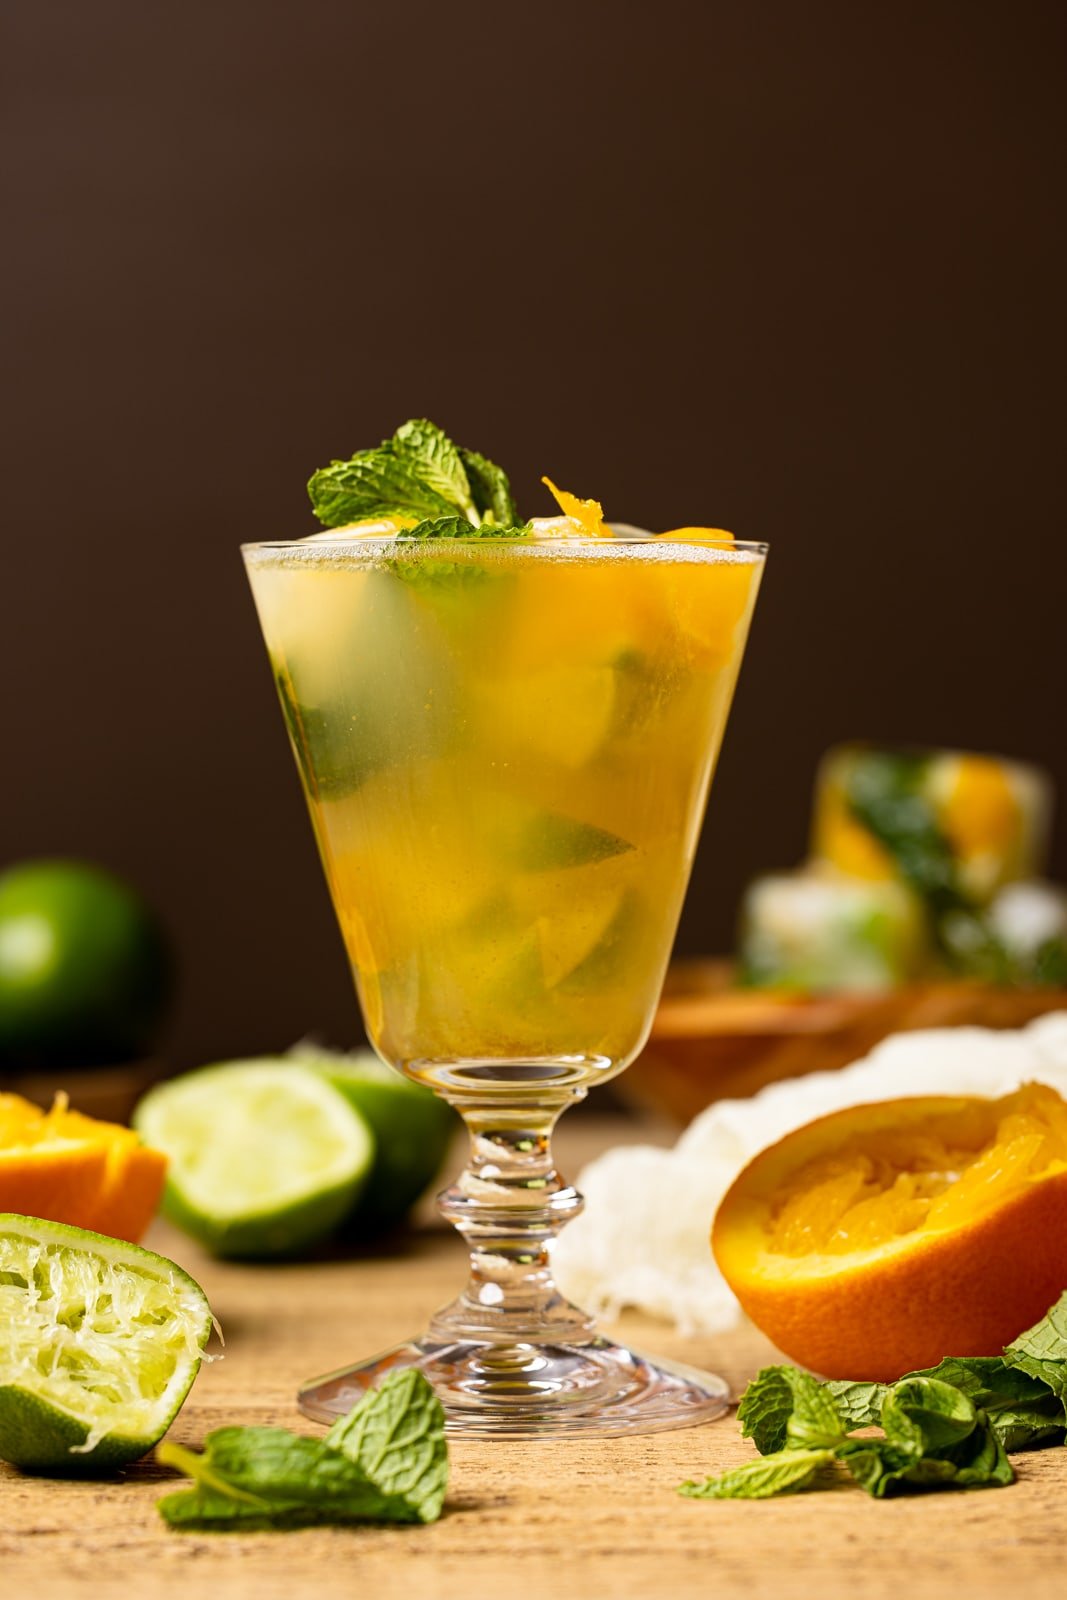 A tall glass full of mocktail mixture with slices of oranges, lime, fresh mint leaves on a brown wood table.